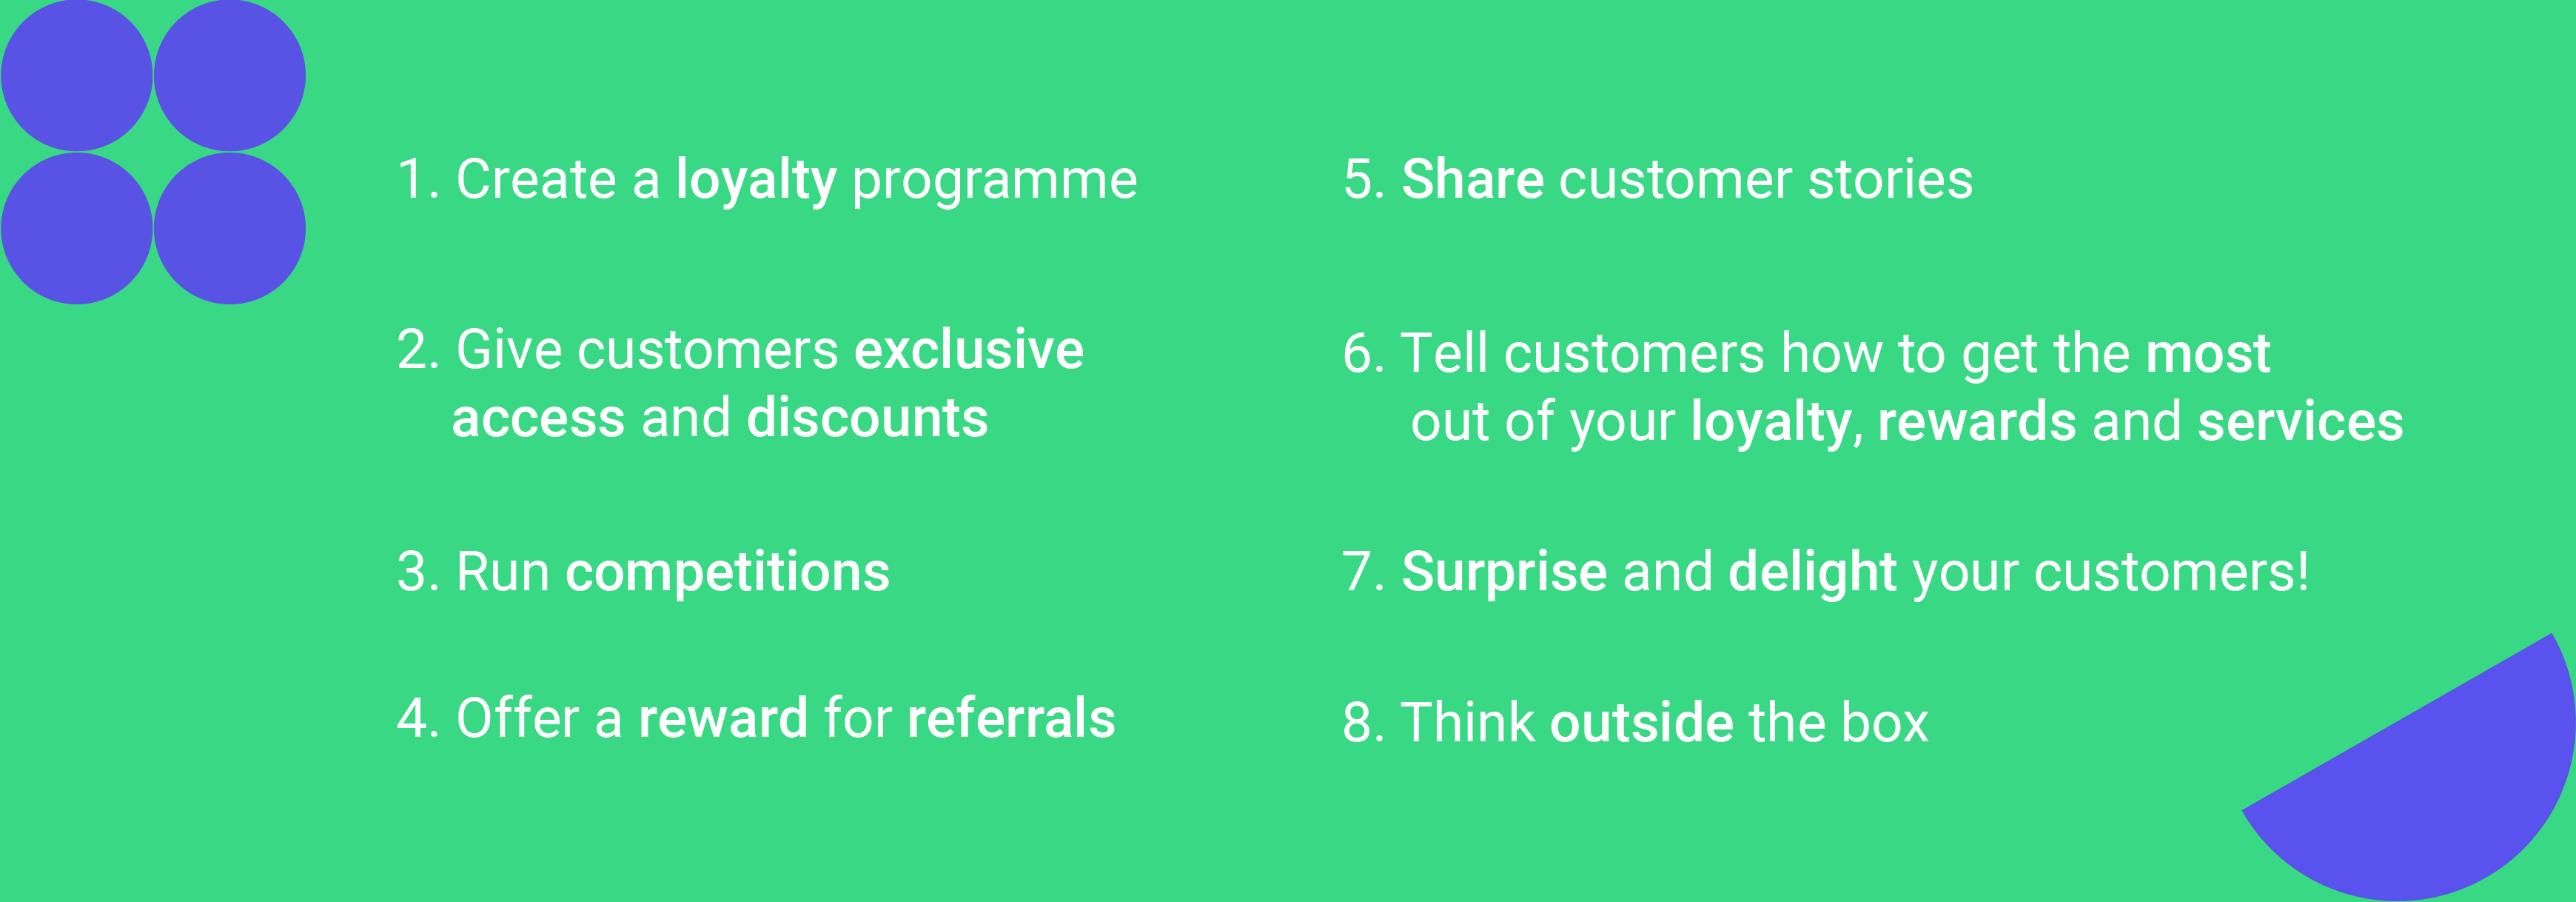 How to reward customer loyalty in 8 steps overview